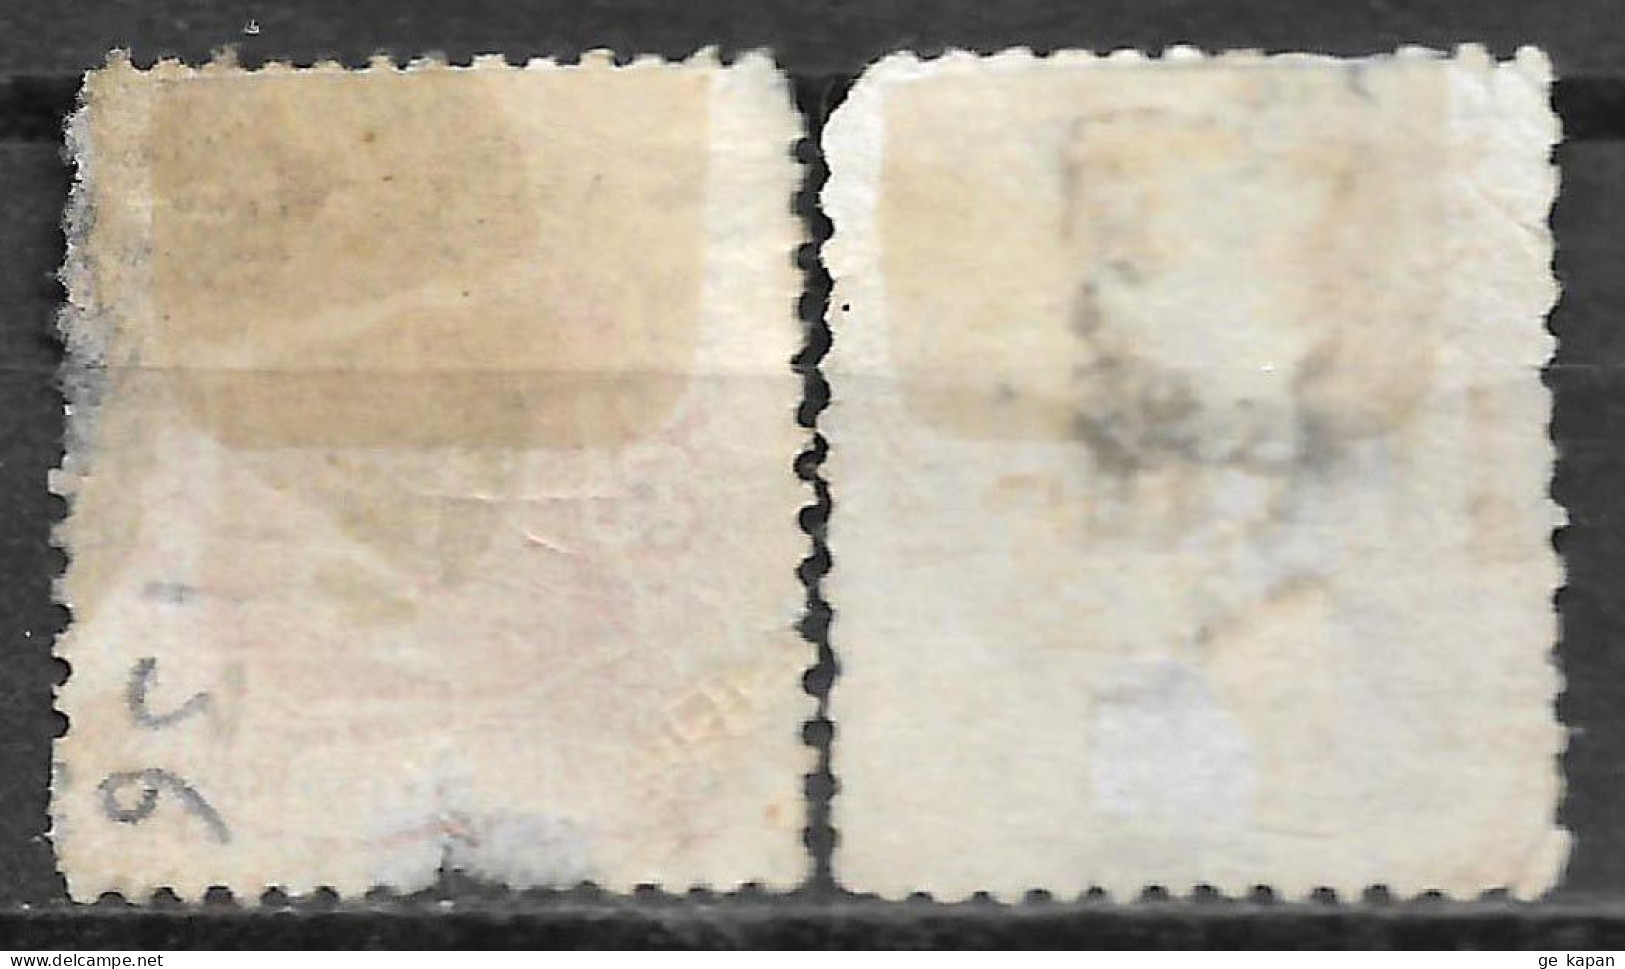 1882,1884 BRAZIL Set Of 2 Used Stamps (Scott # 84,85) CV $27.00 - Used Stamps